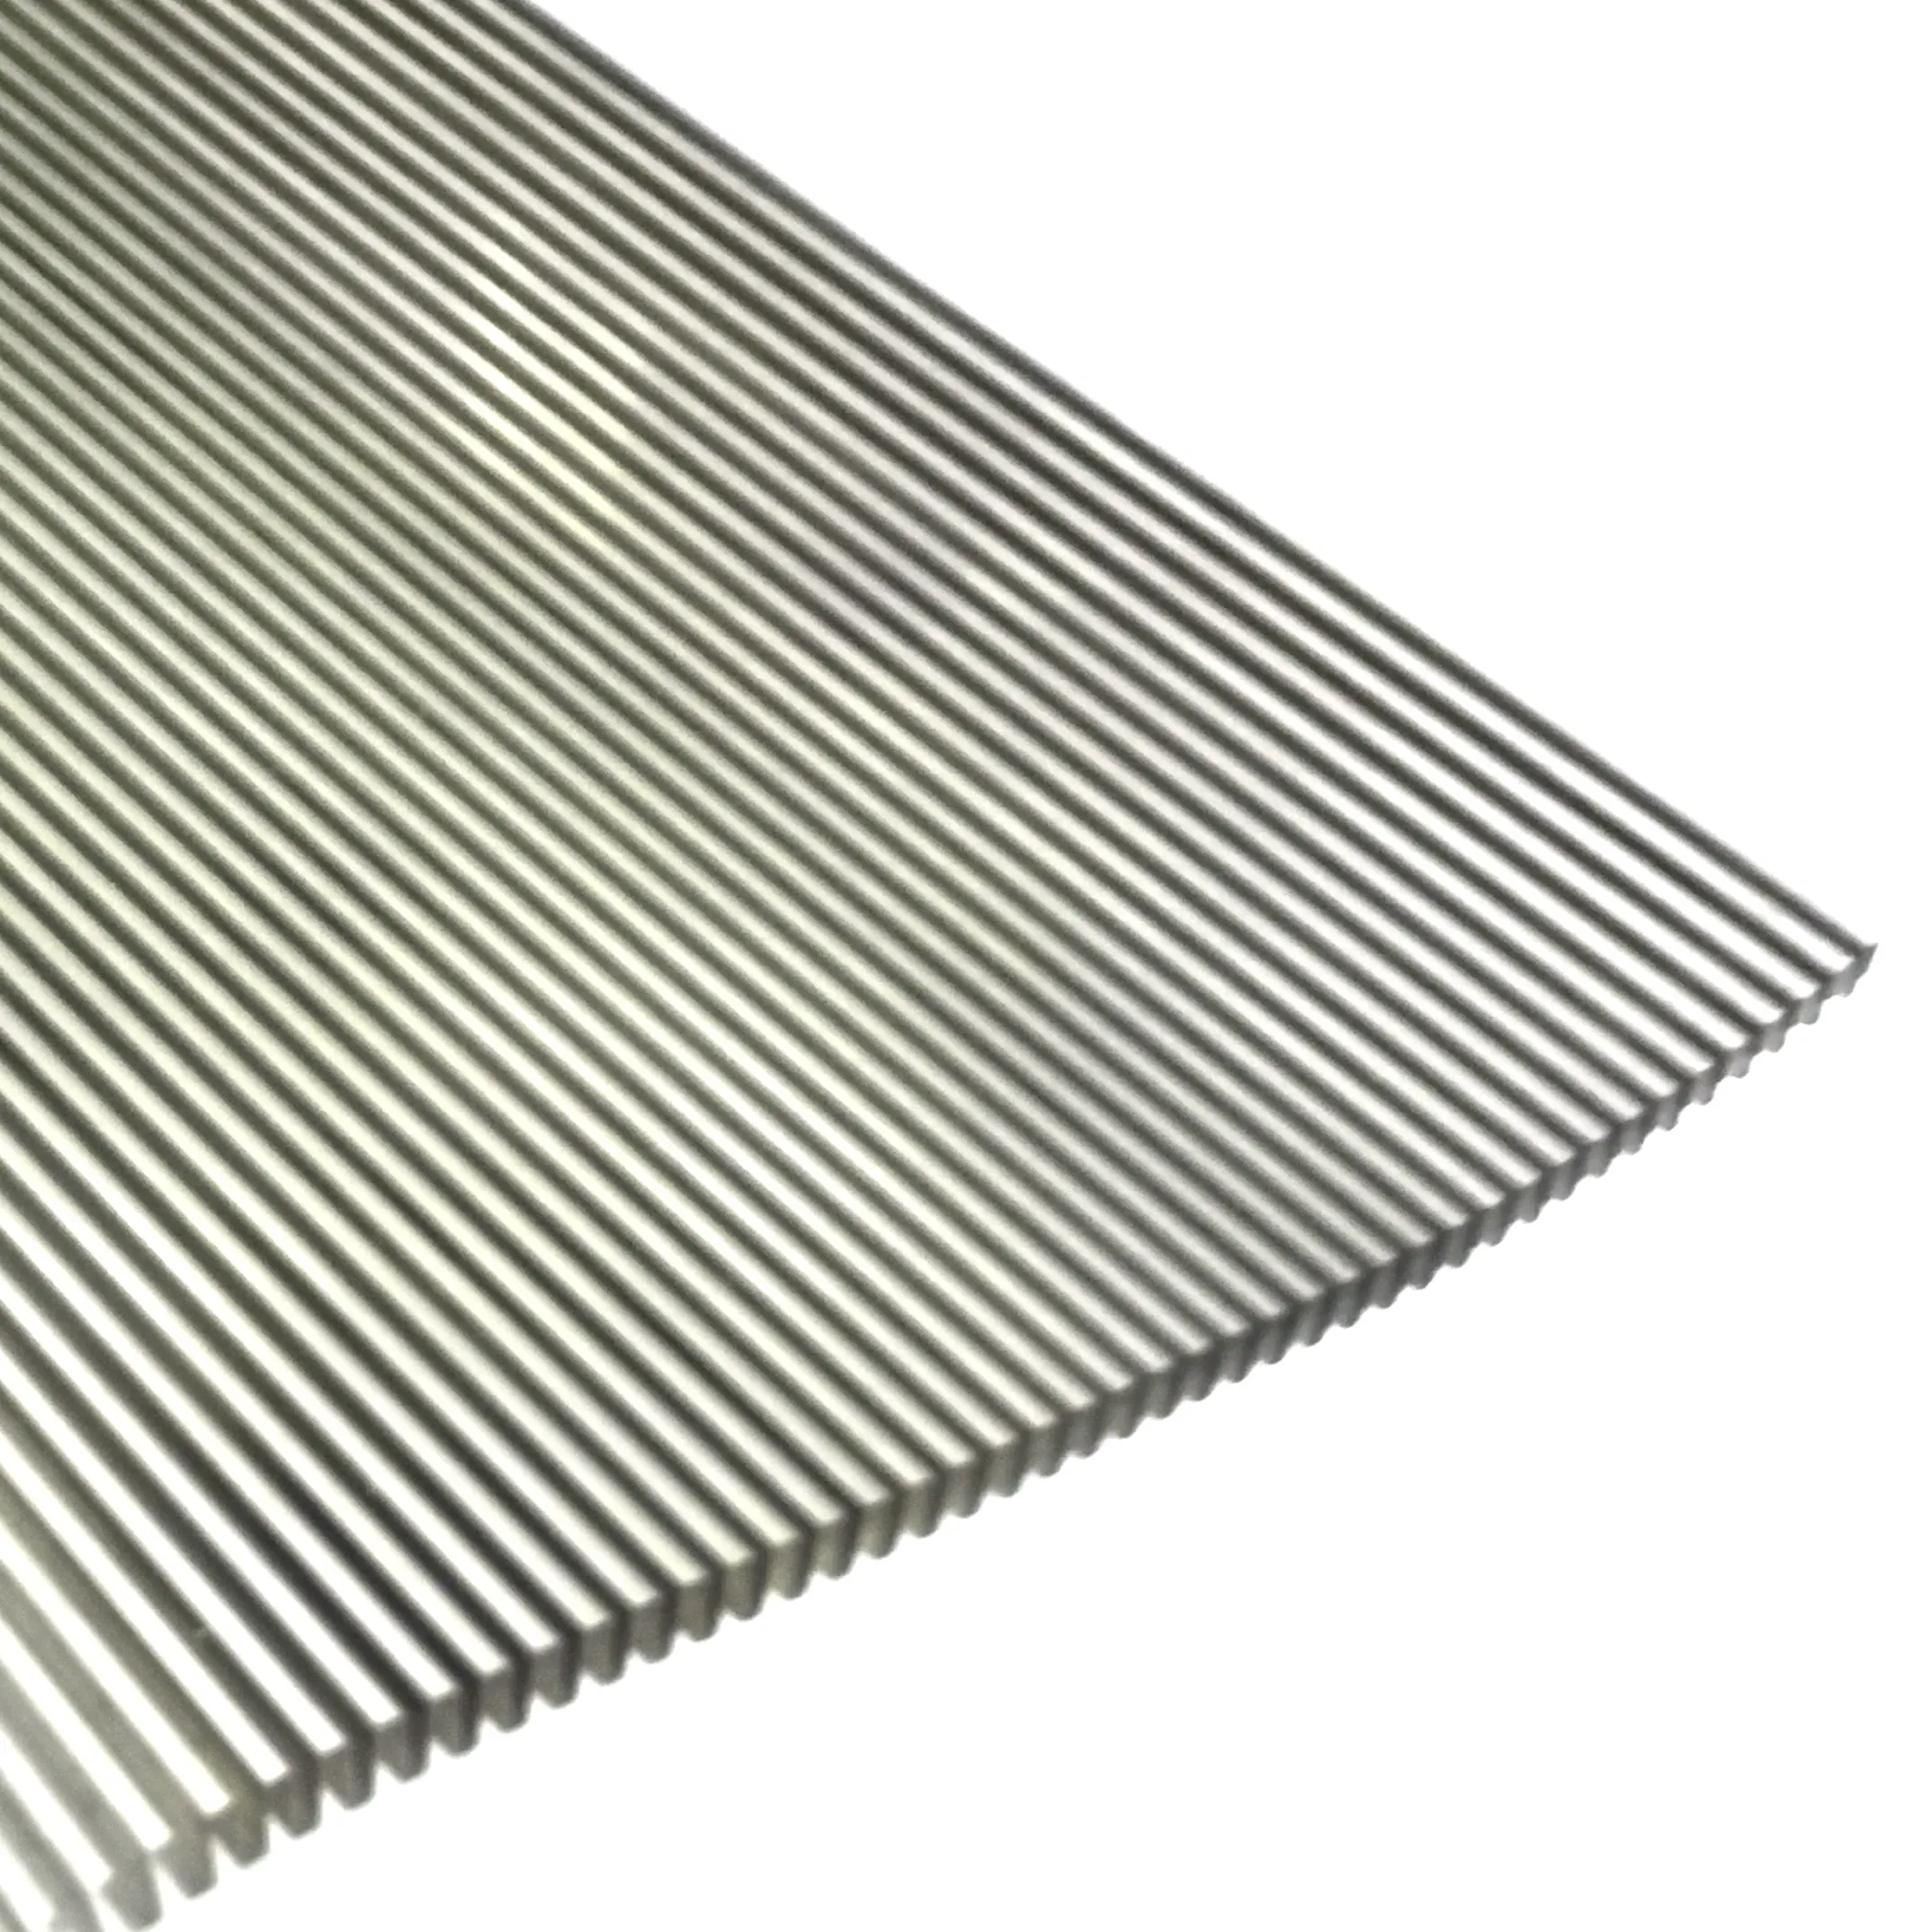 Stainless steel bending stamping corrugated plate precision metal stamping corrugated block